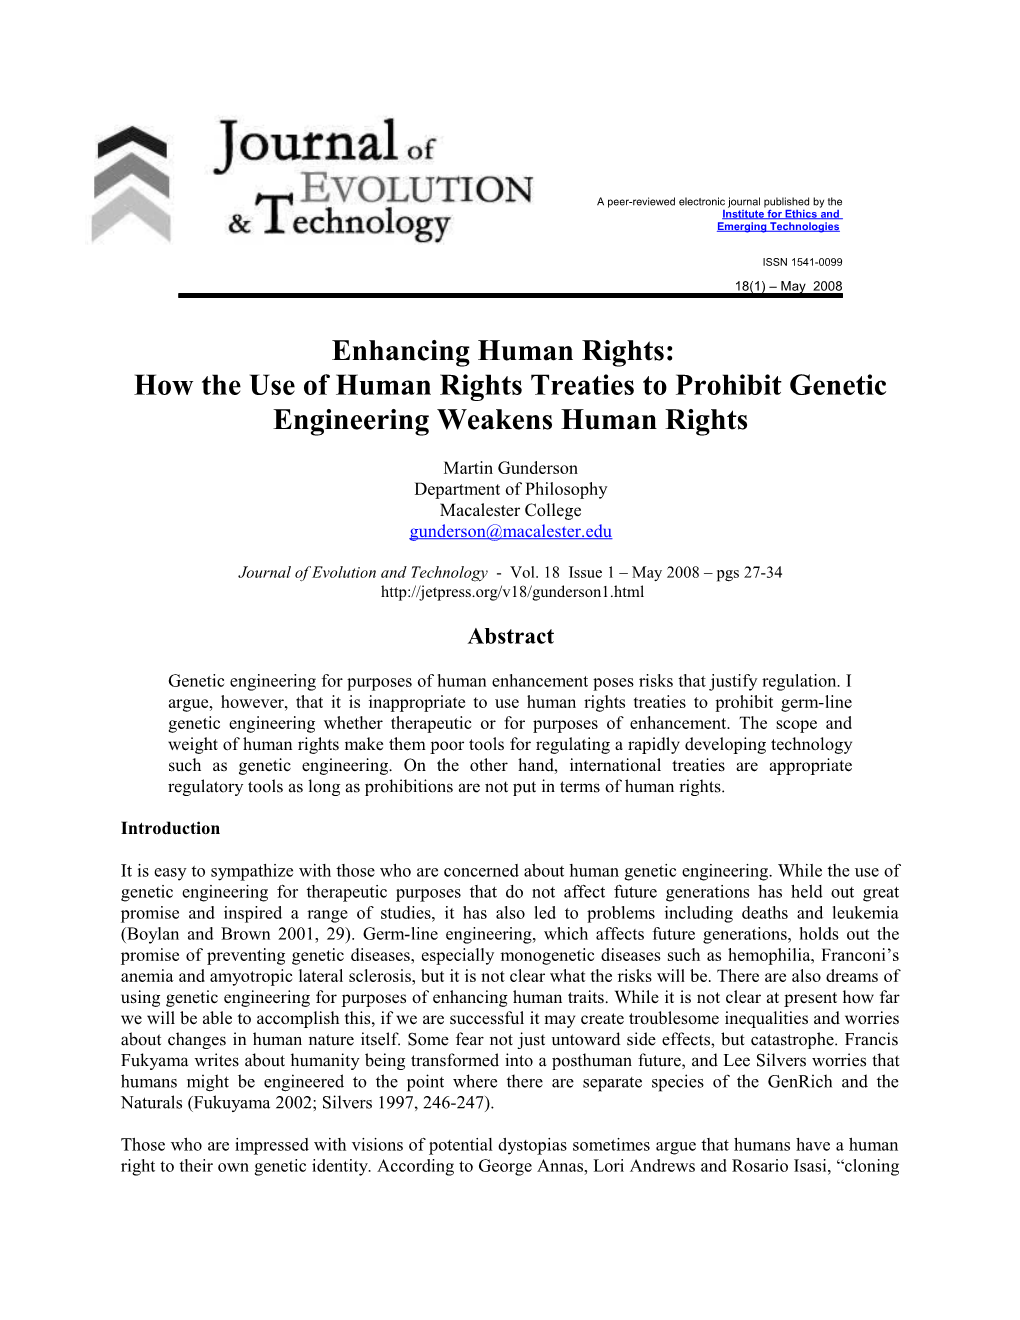 Human Rights and Genetic Engineering